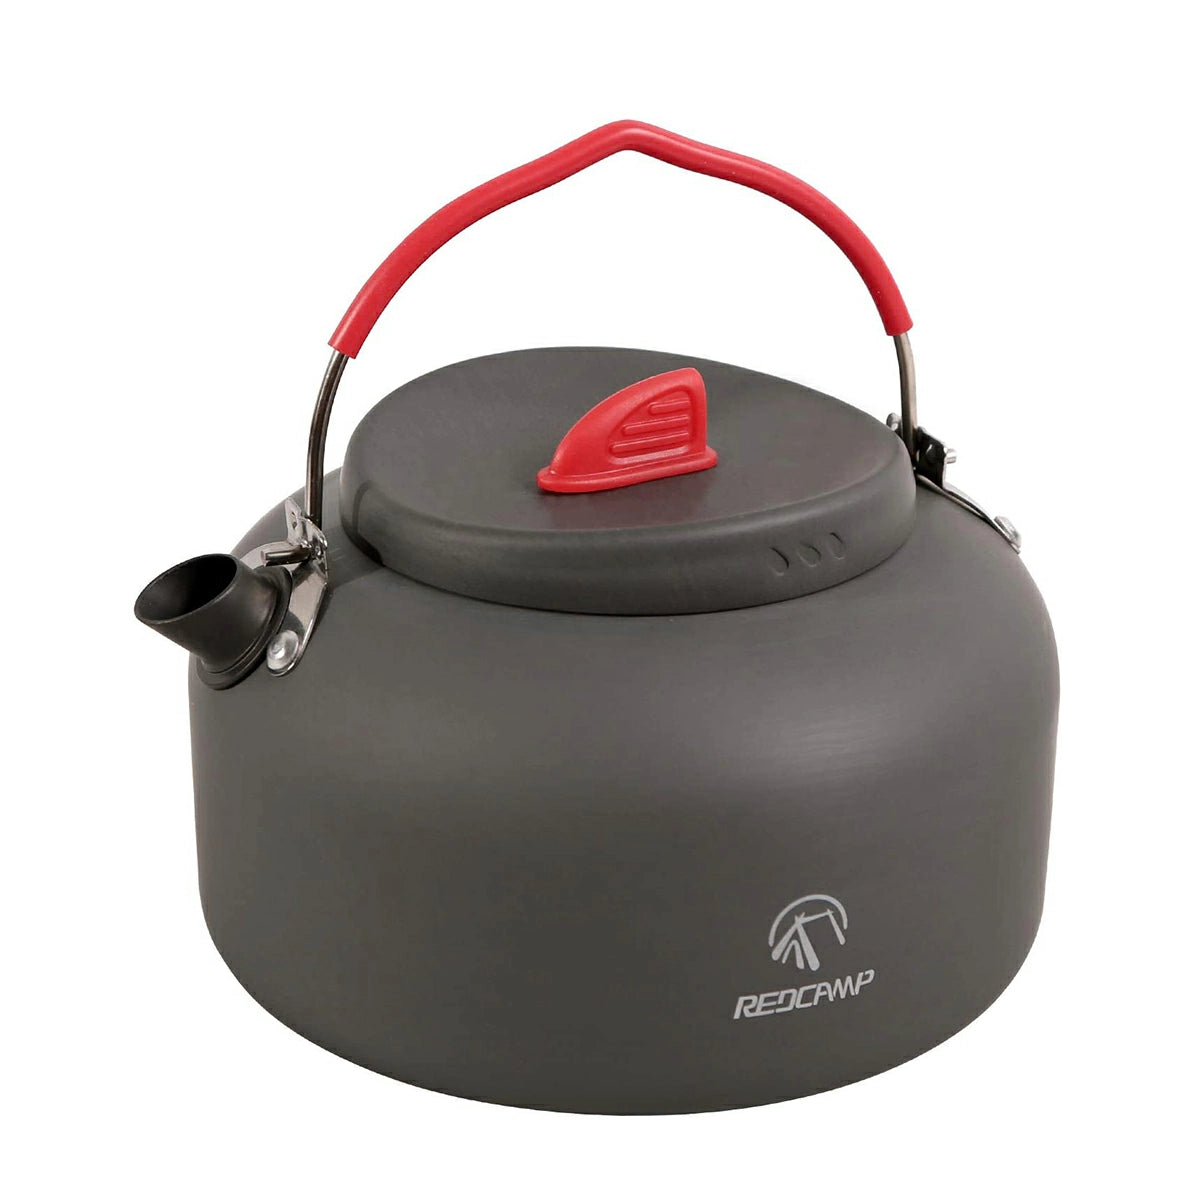  Camping Tea Kettle, Hiking Kettle, Camping Kettles For